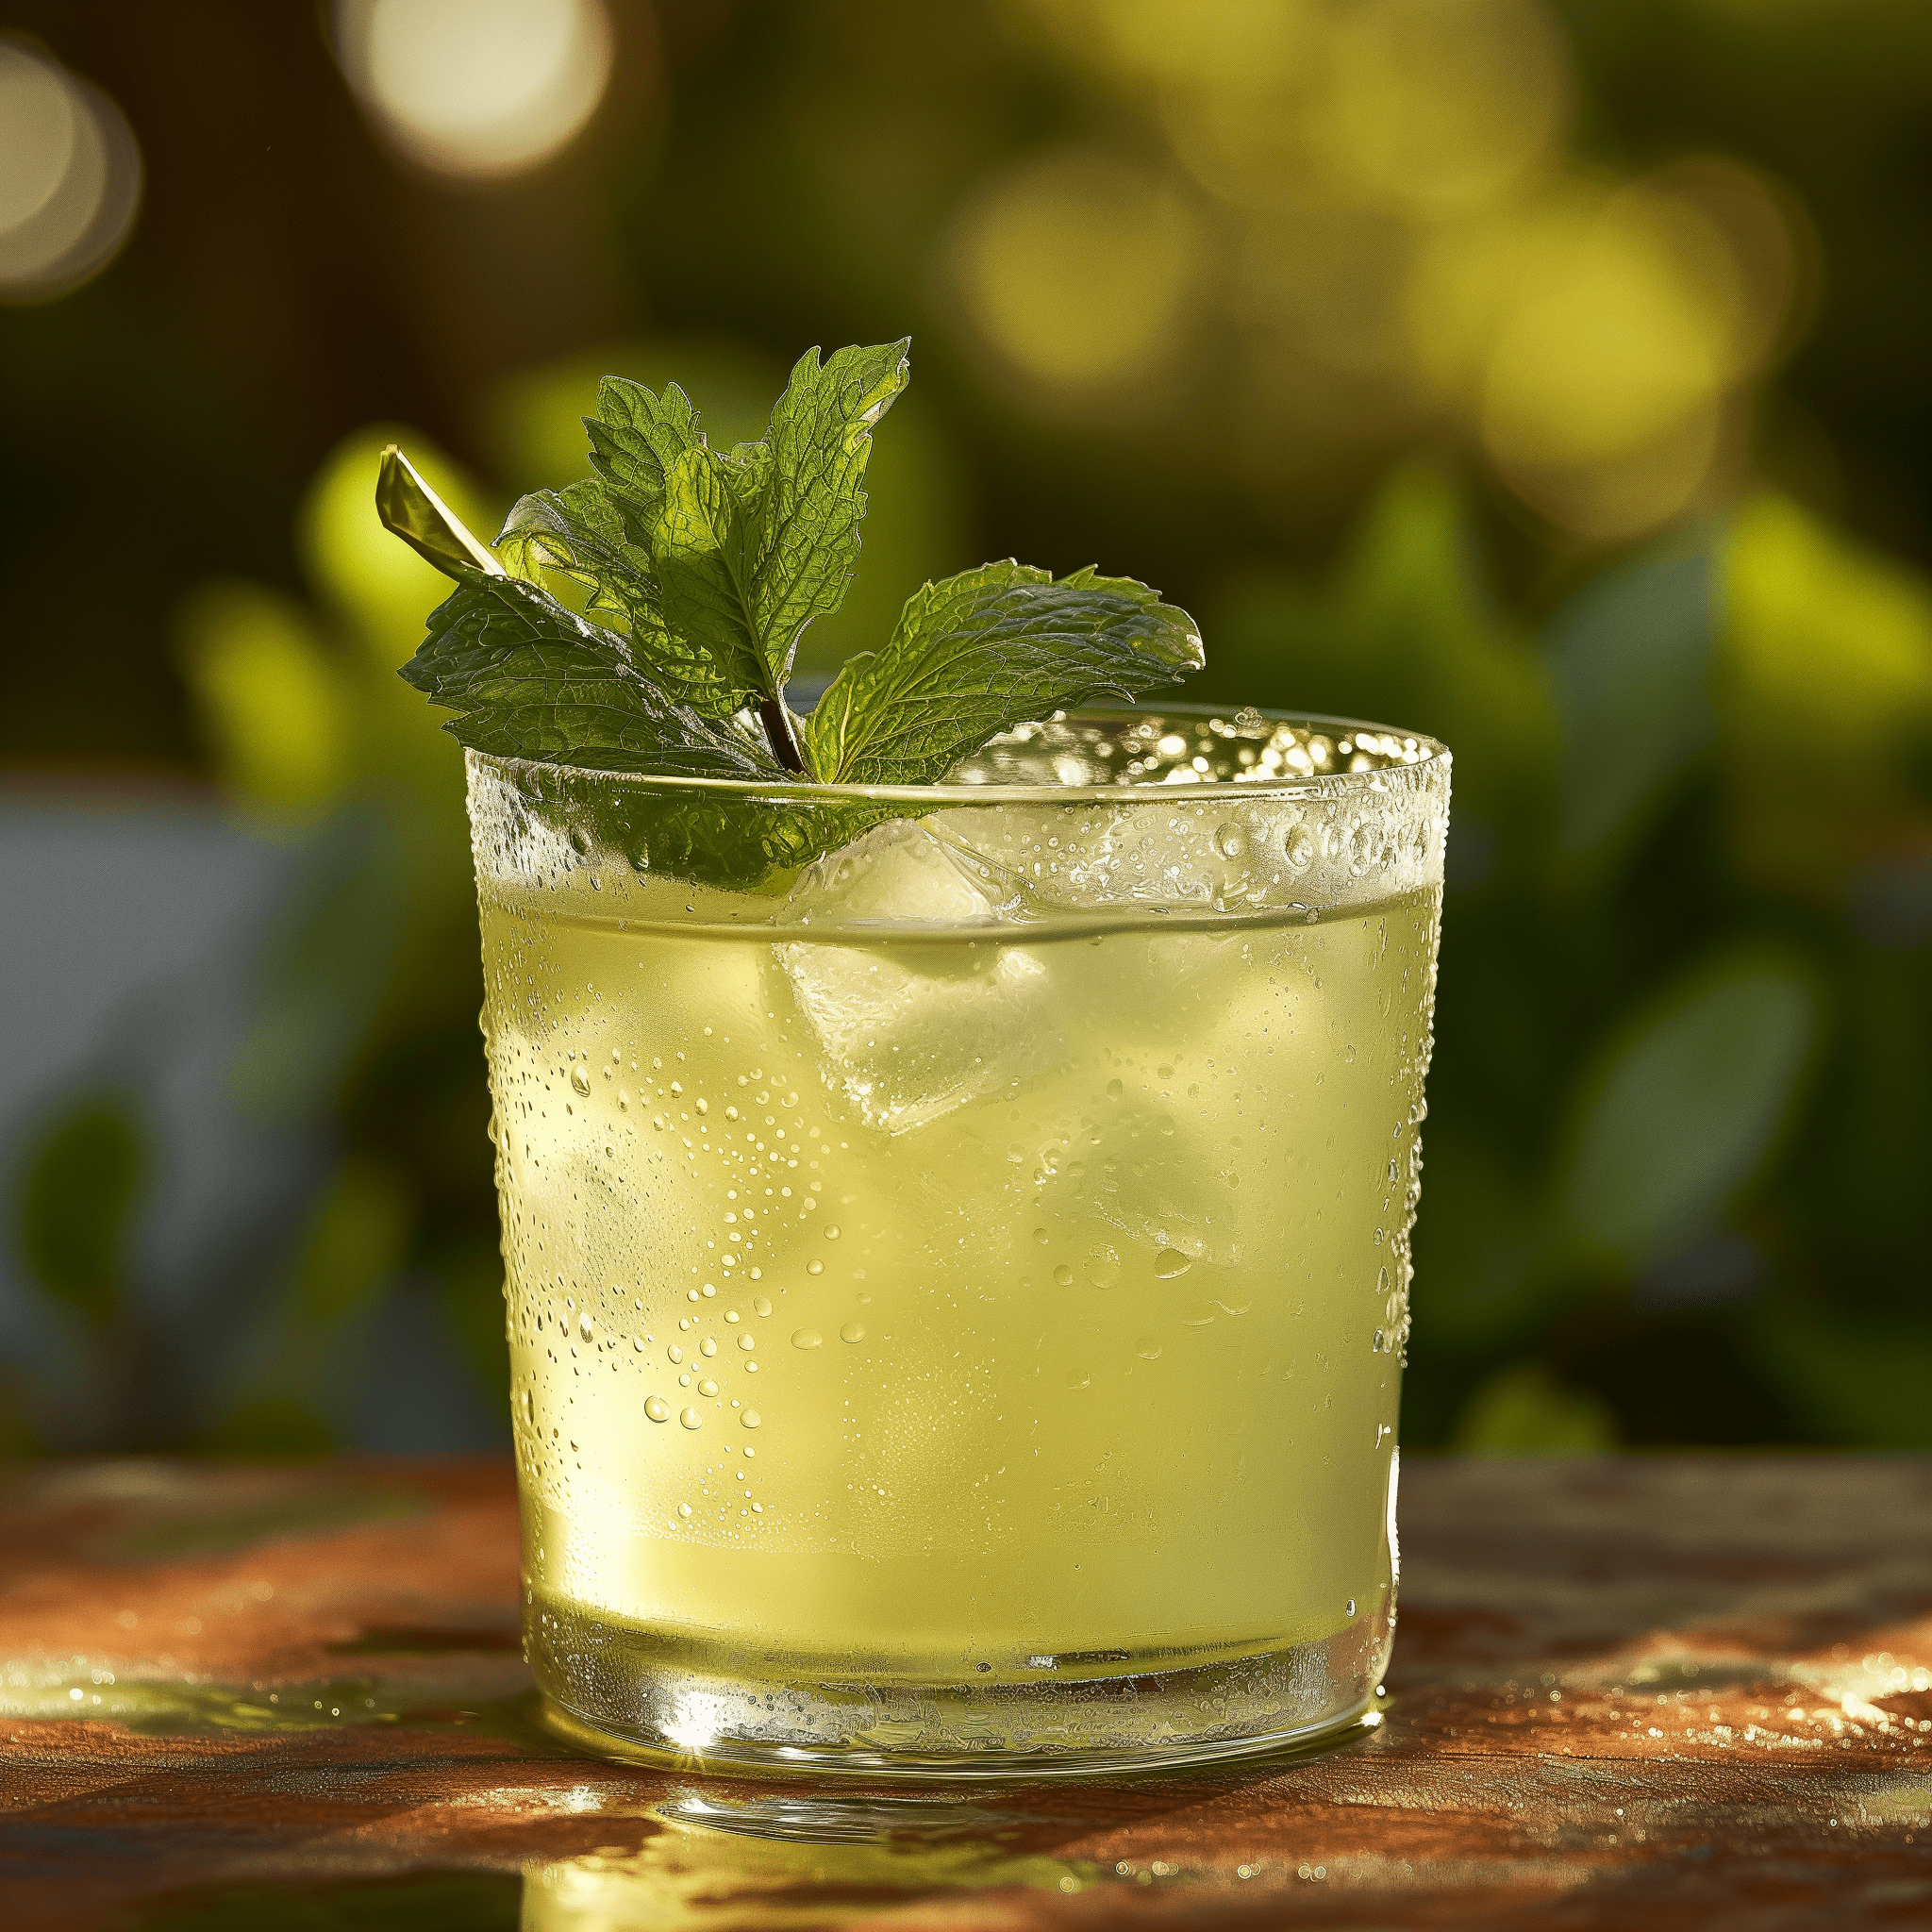 Minted Man Cocktail Recipe - The *Minted Man* offers a crisp and invigorating taste. The fresh mint leaves provide a cool, herbal undertone, while the lime juice adds a zesty, sour kick. The simple syrup balances the acidity with a subtle sweetness, and the vodka gives it a smooth, strong backbone. The club soda introduces a bubbly lightness, making it an overall refreshing cocktail.